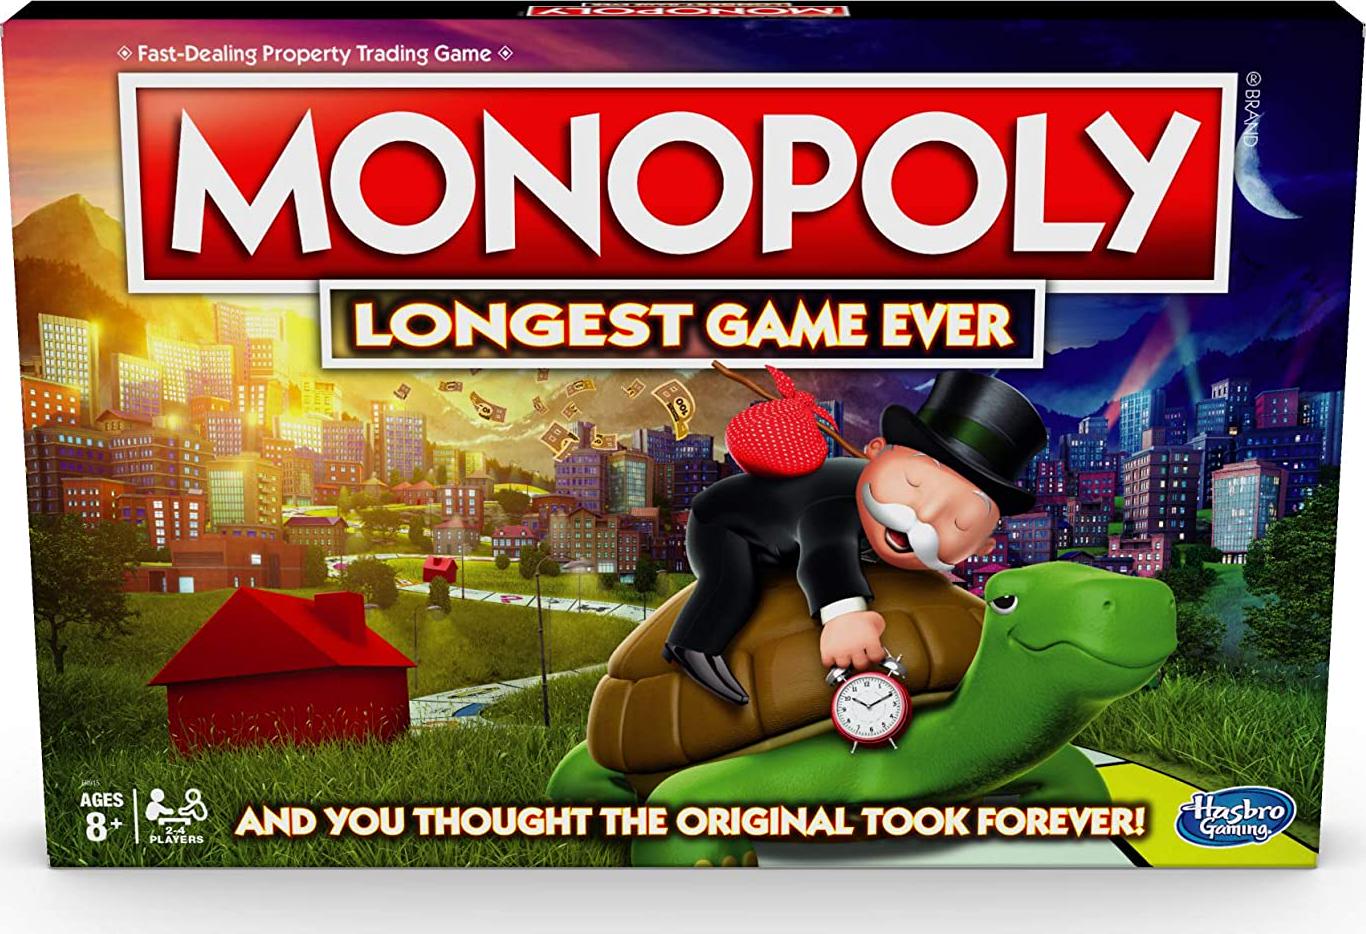 MONOPOLY, Monopoly Longest Game Ever